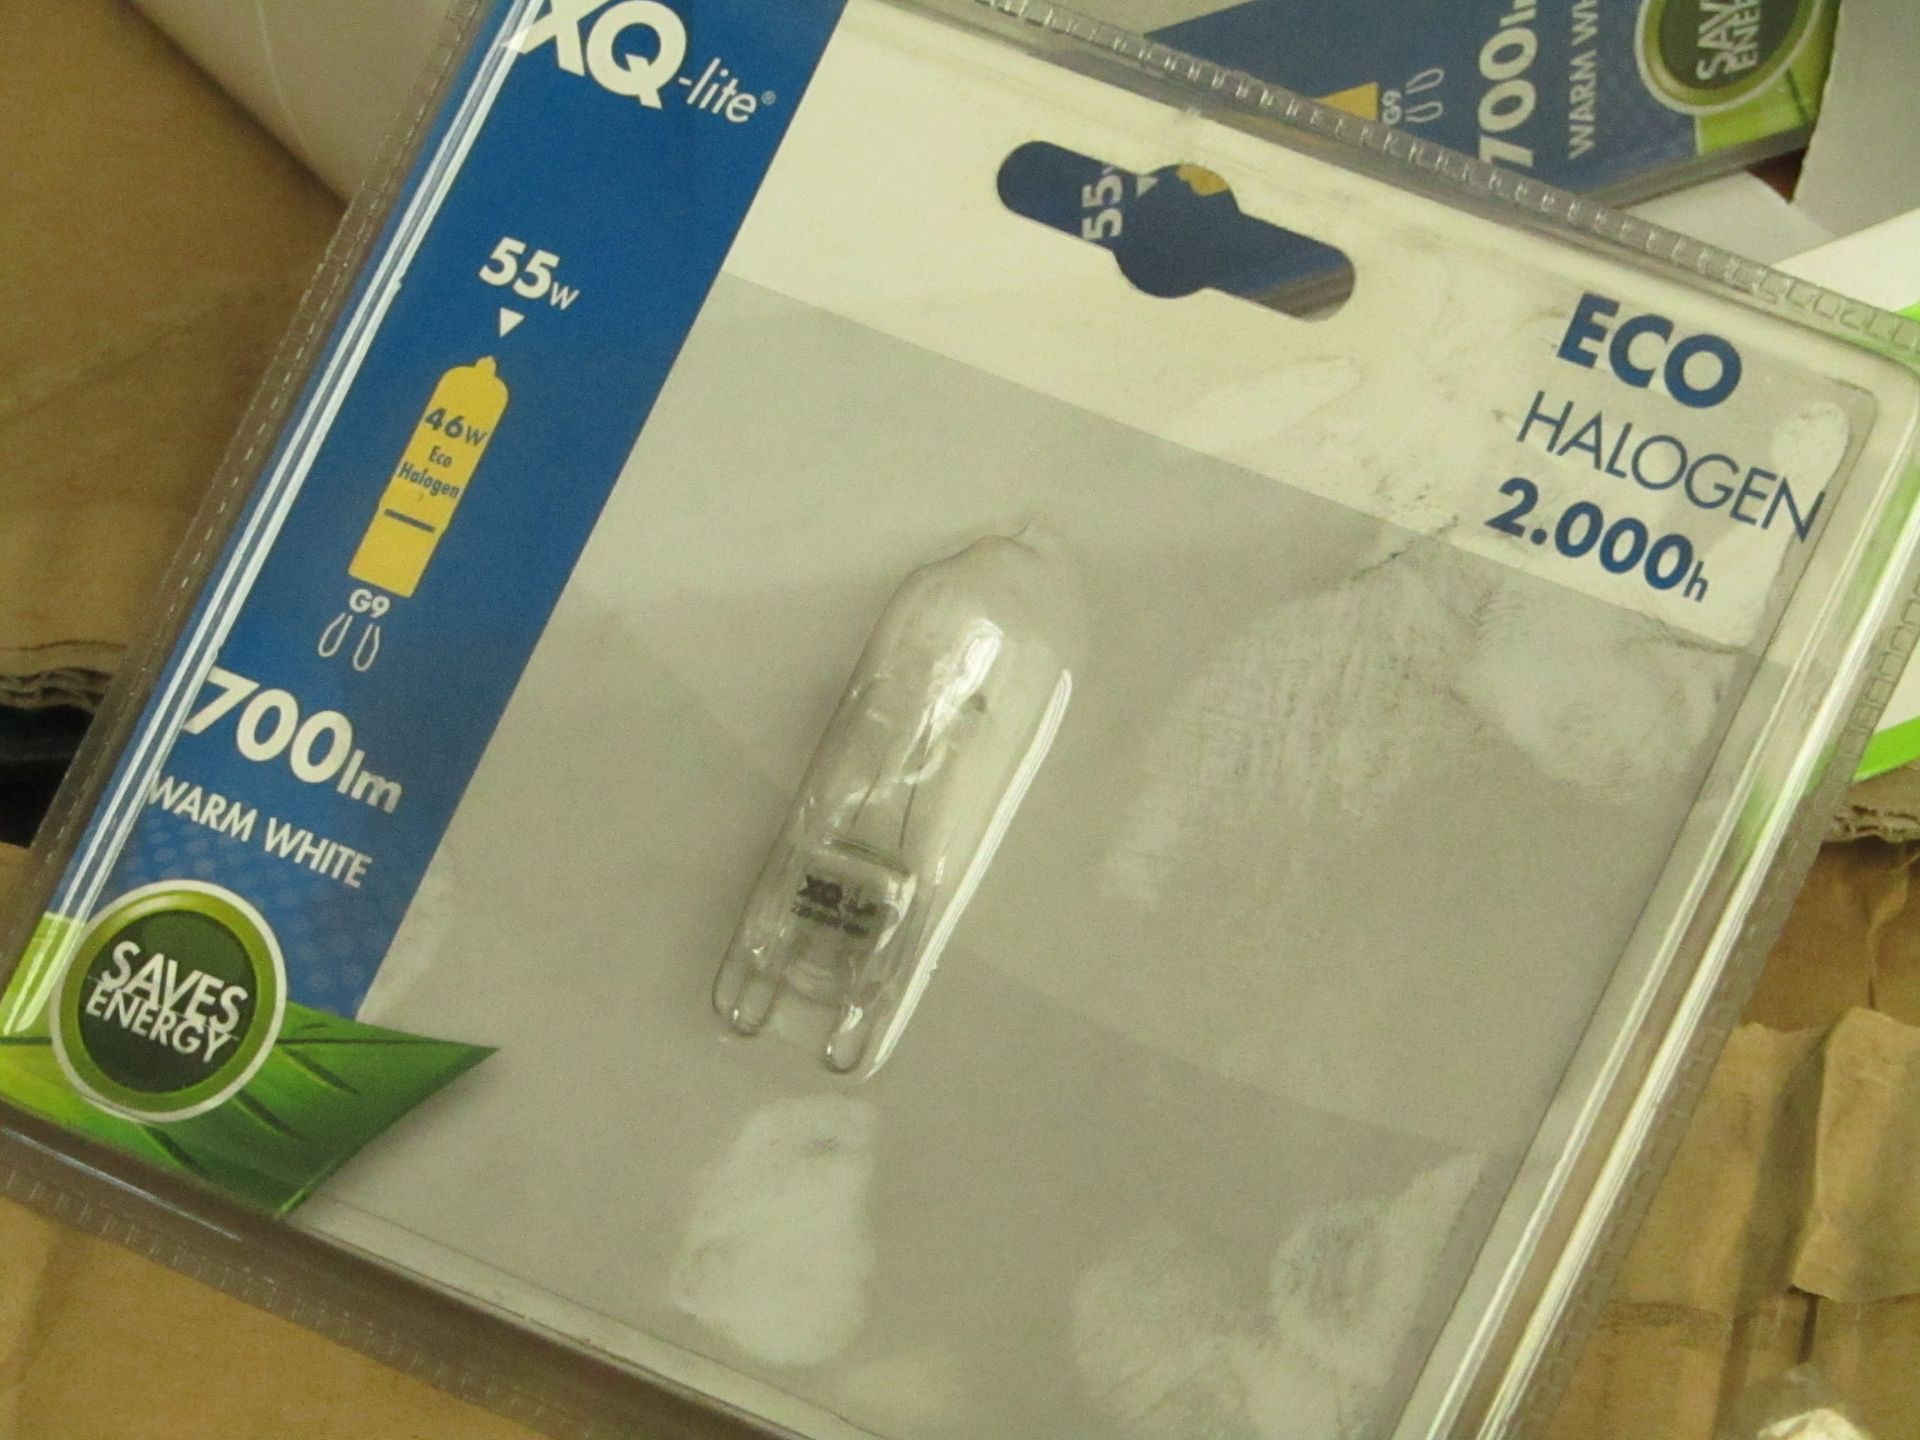 5x XQ-Lite 700lm warm white wirefree eco halogen bulbs, all brand new and packaged. - Image 2 of 2